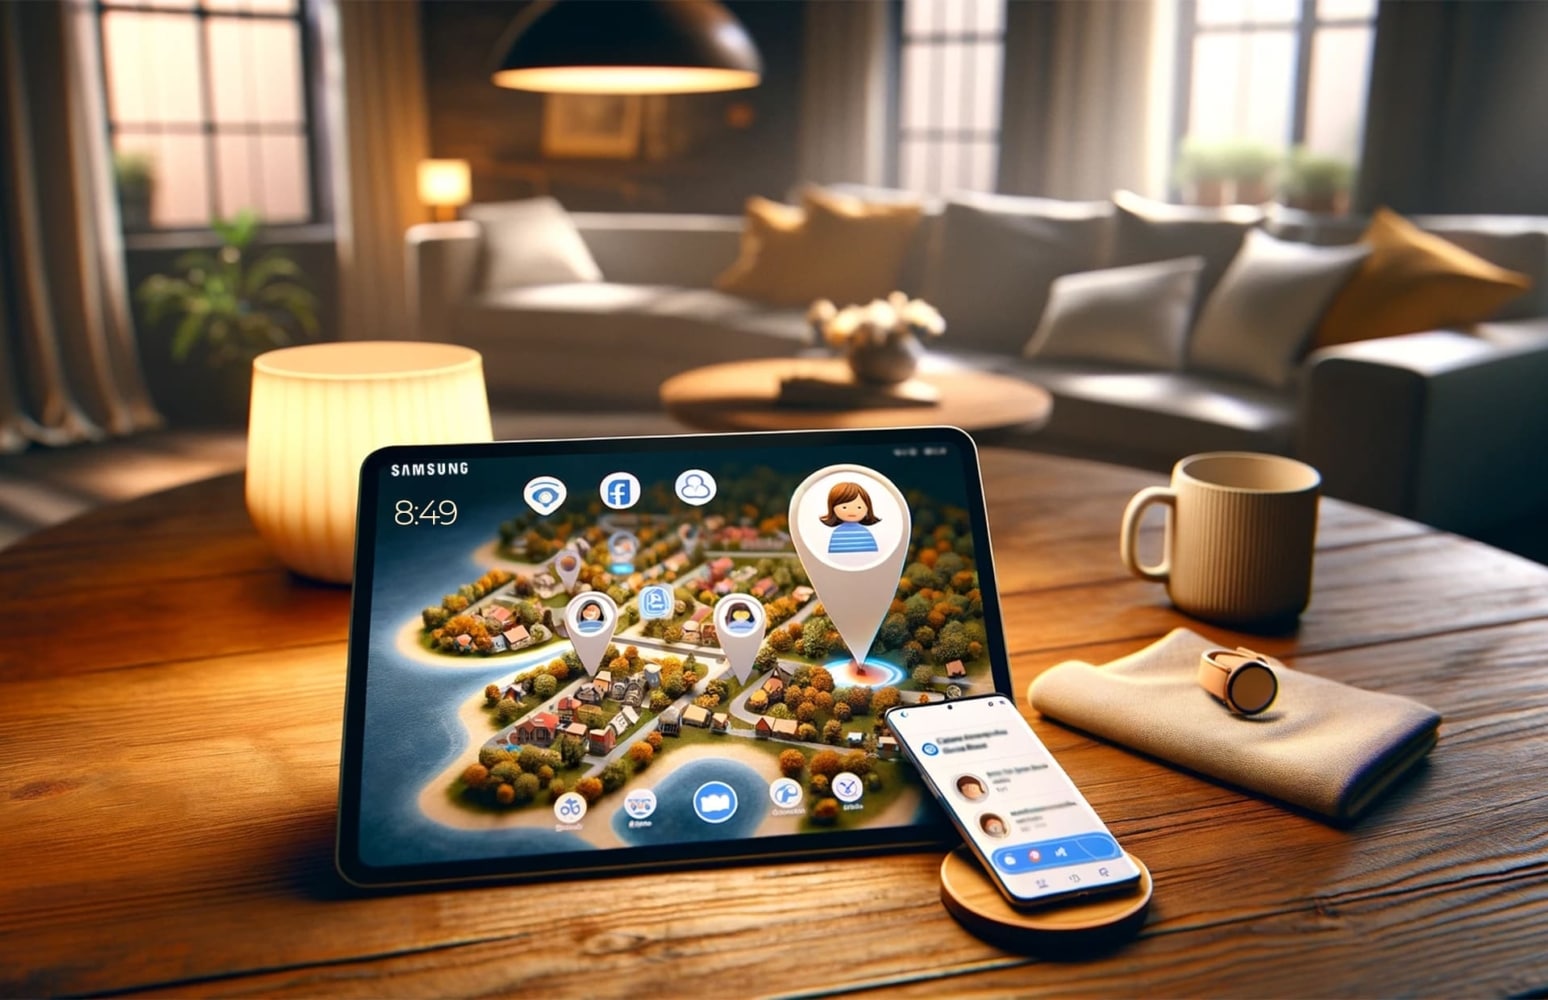 In the room, a Samsung tablet with an open map showing the terrain with trees and houses and geolocation marks is lying on a table, with a switched-on phone next to it